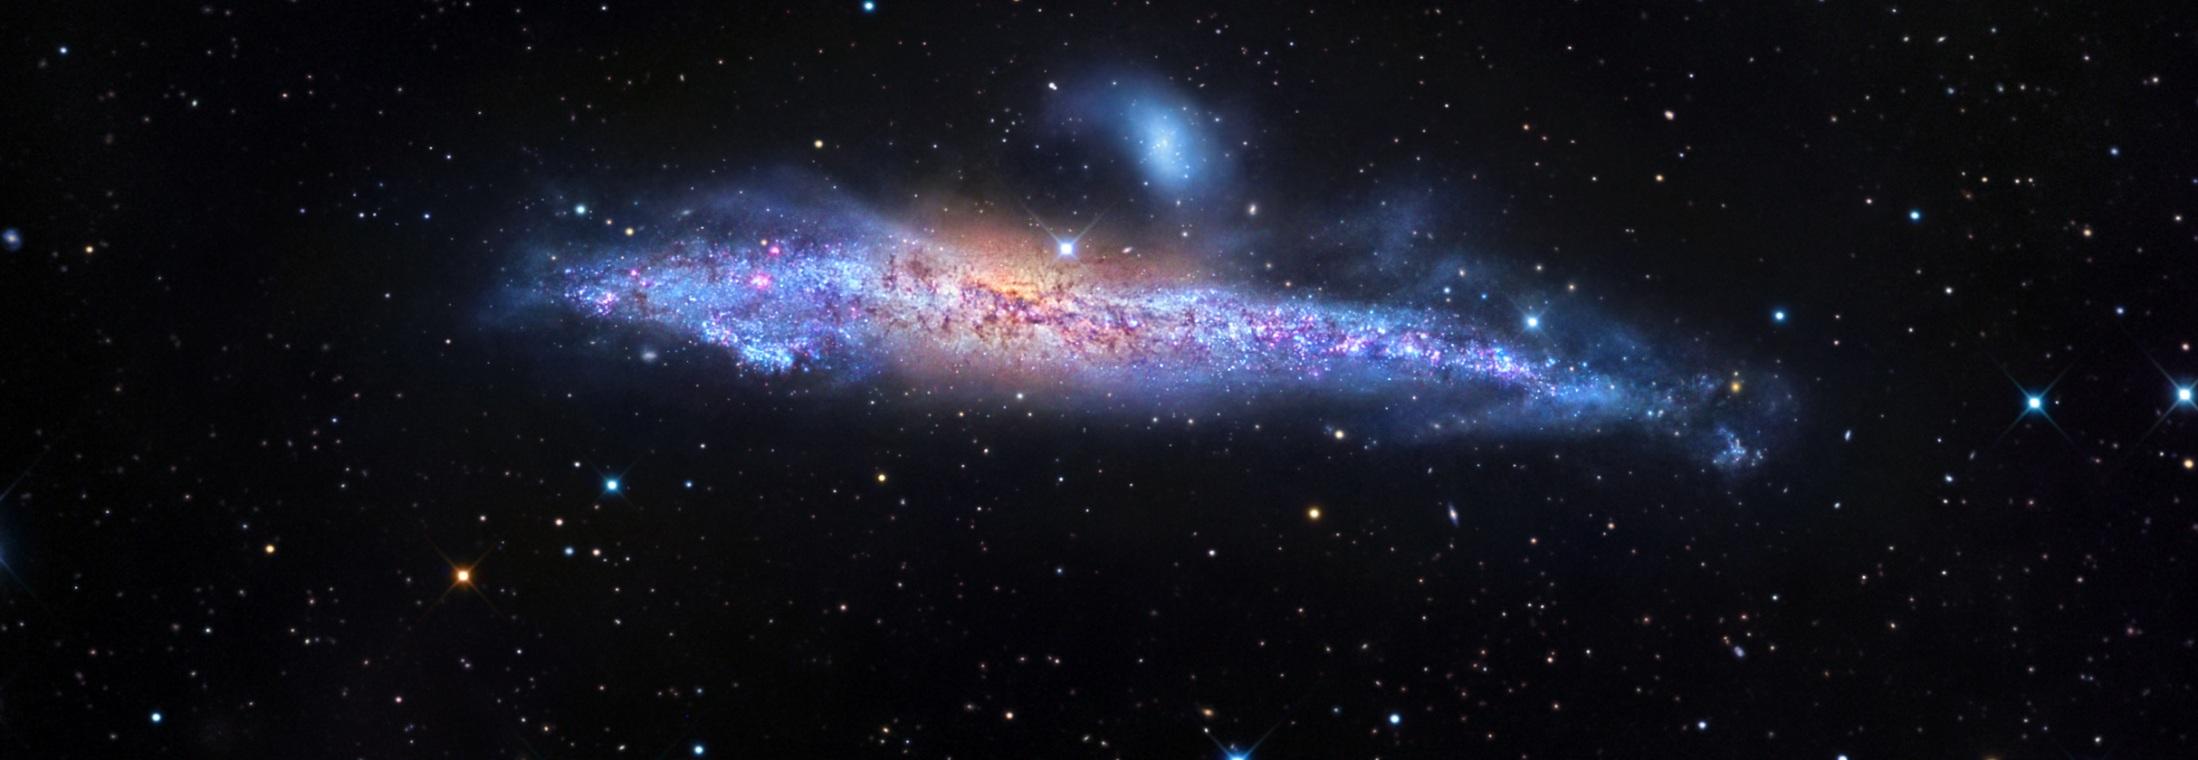 The Whale Galaxy NGC 4631, Image R.